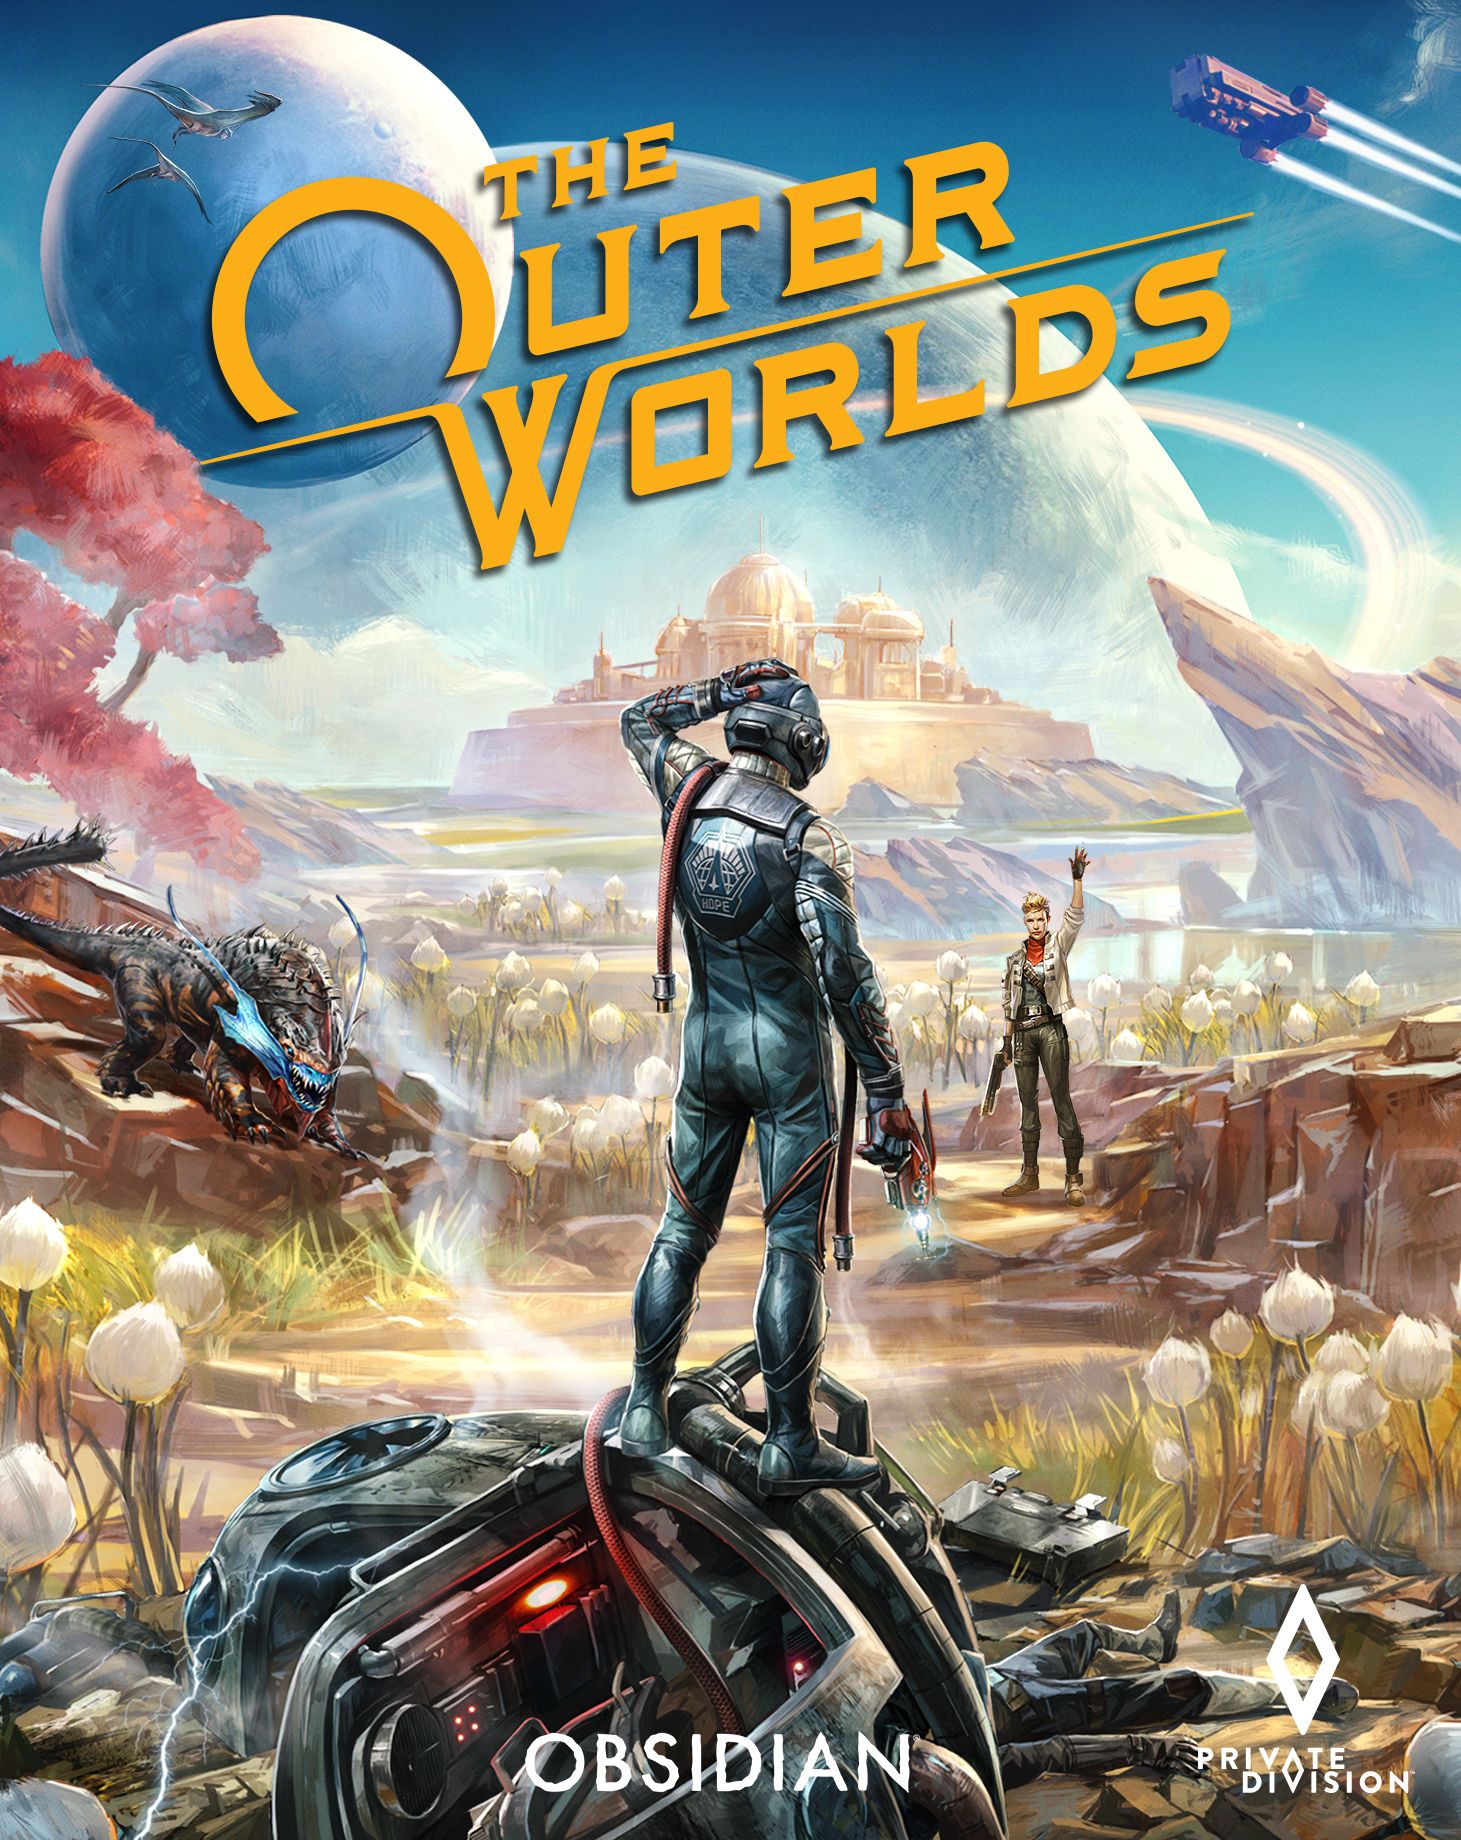 The Outer Worlds video game poster